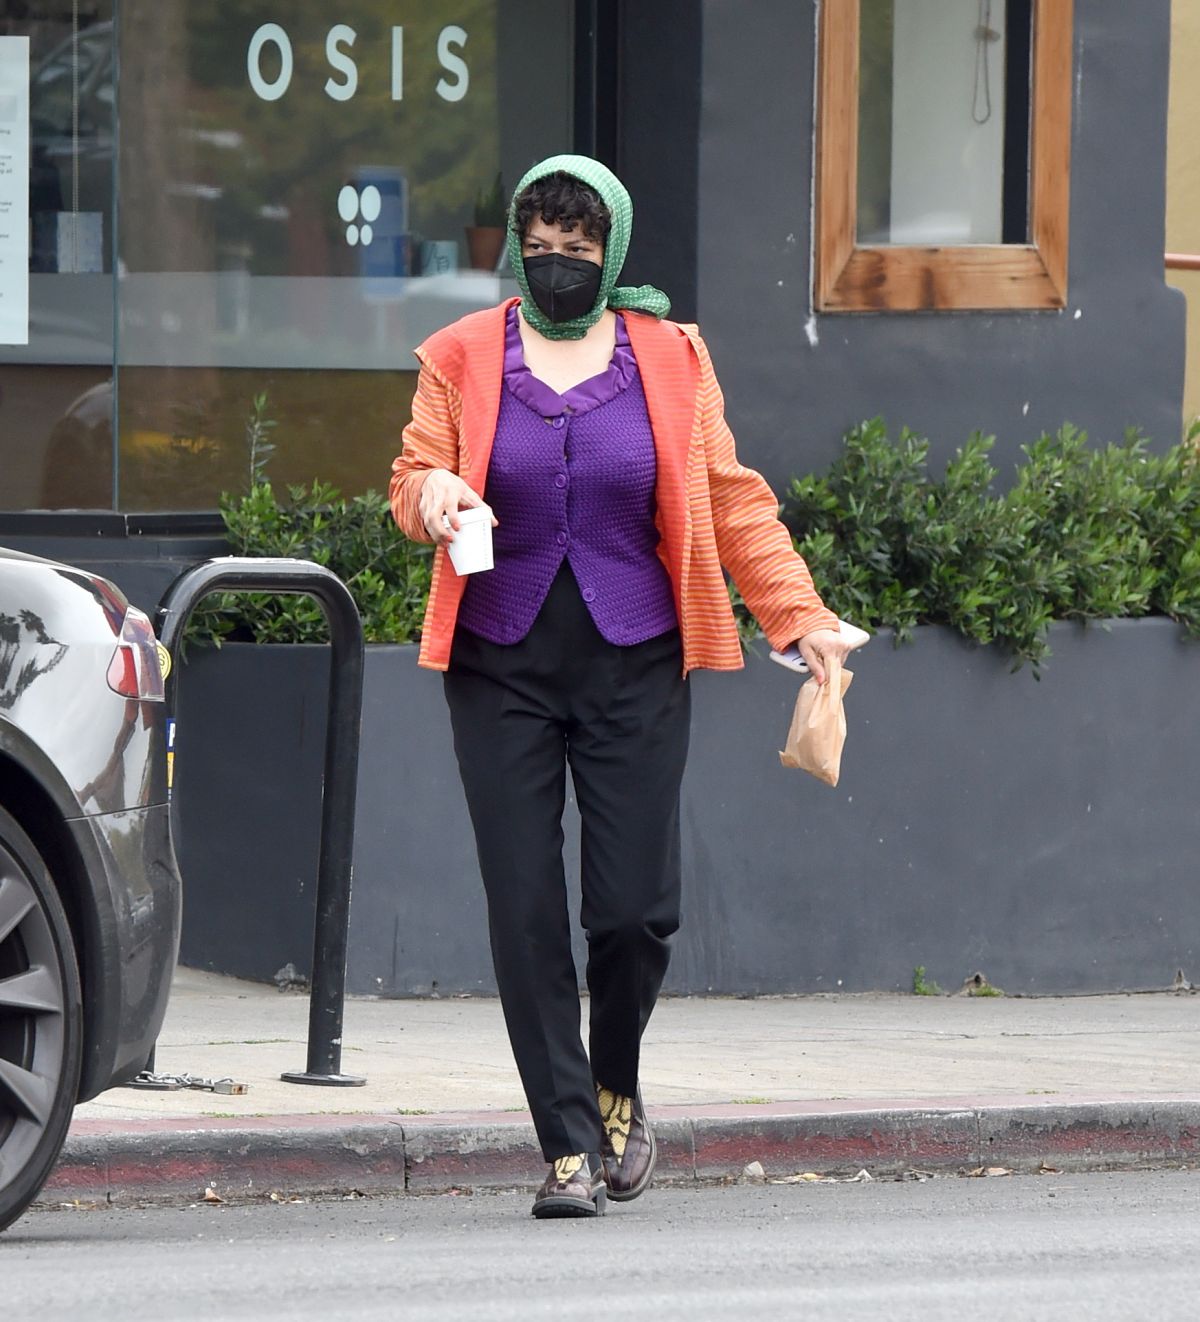 alia-shawkat-out-for-coffee-in-los-angeles-03-25-2021-1.jpg